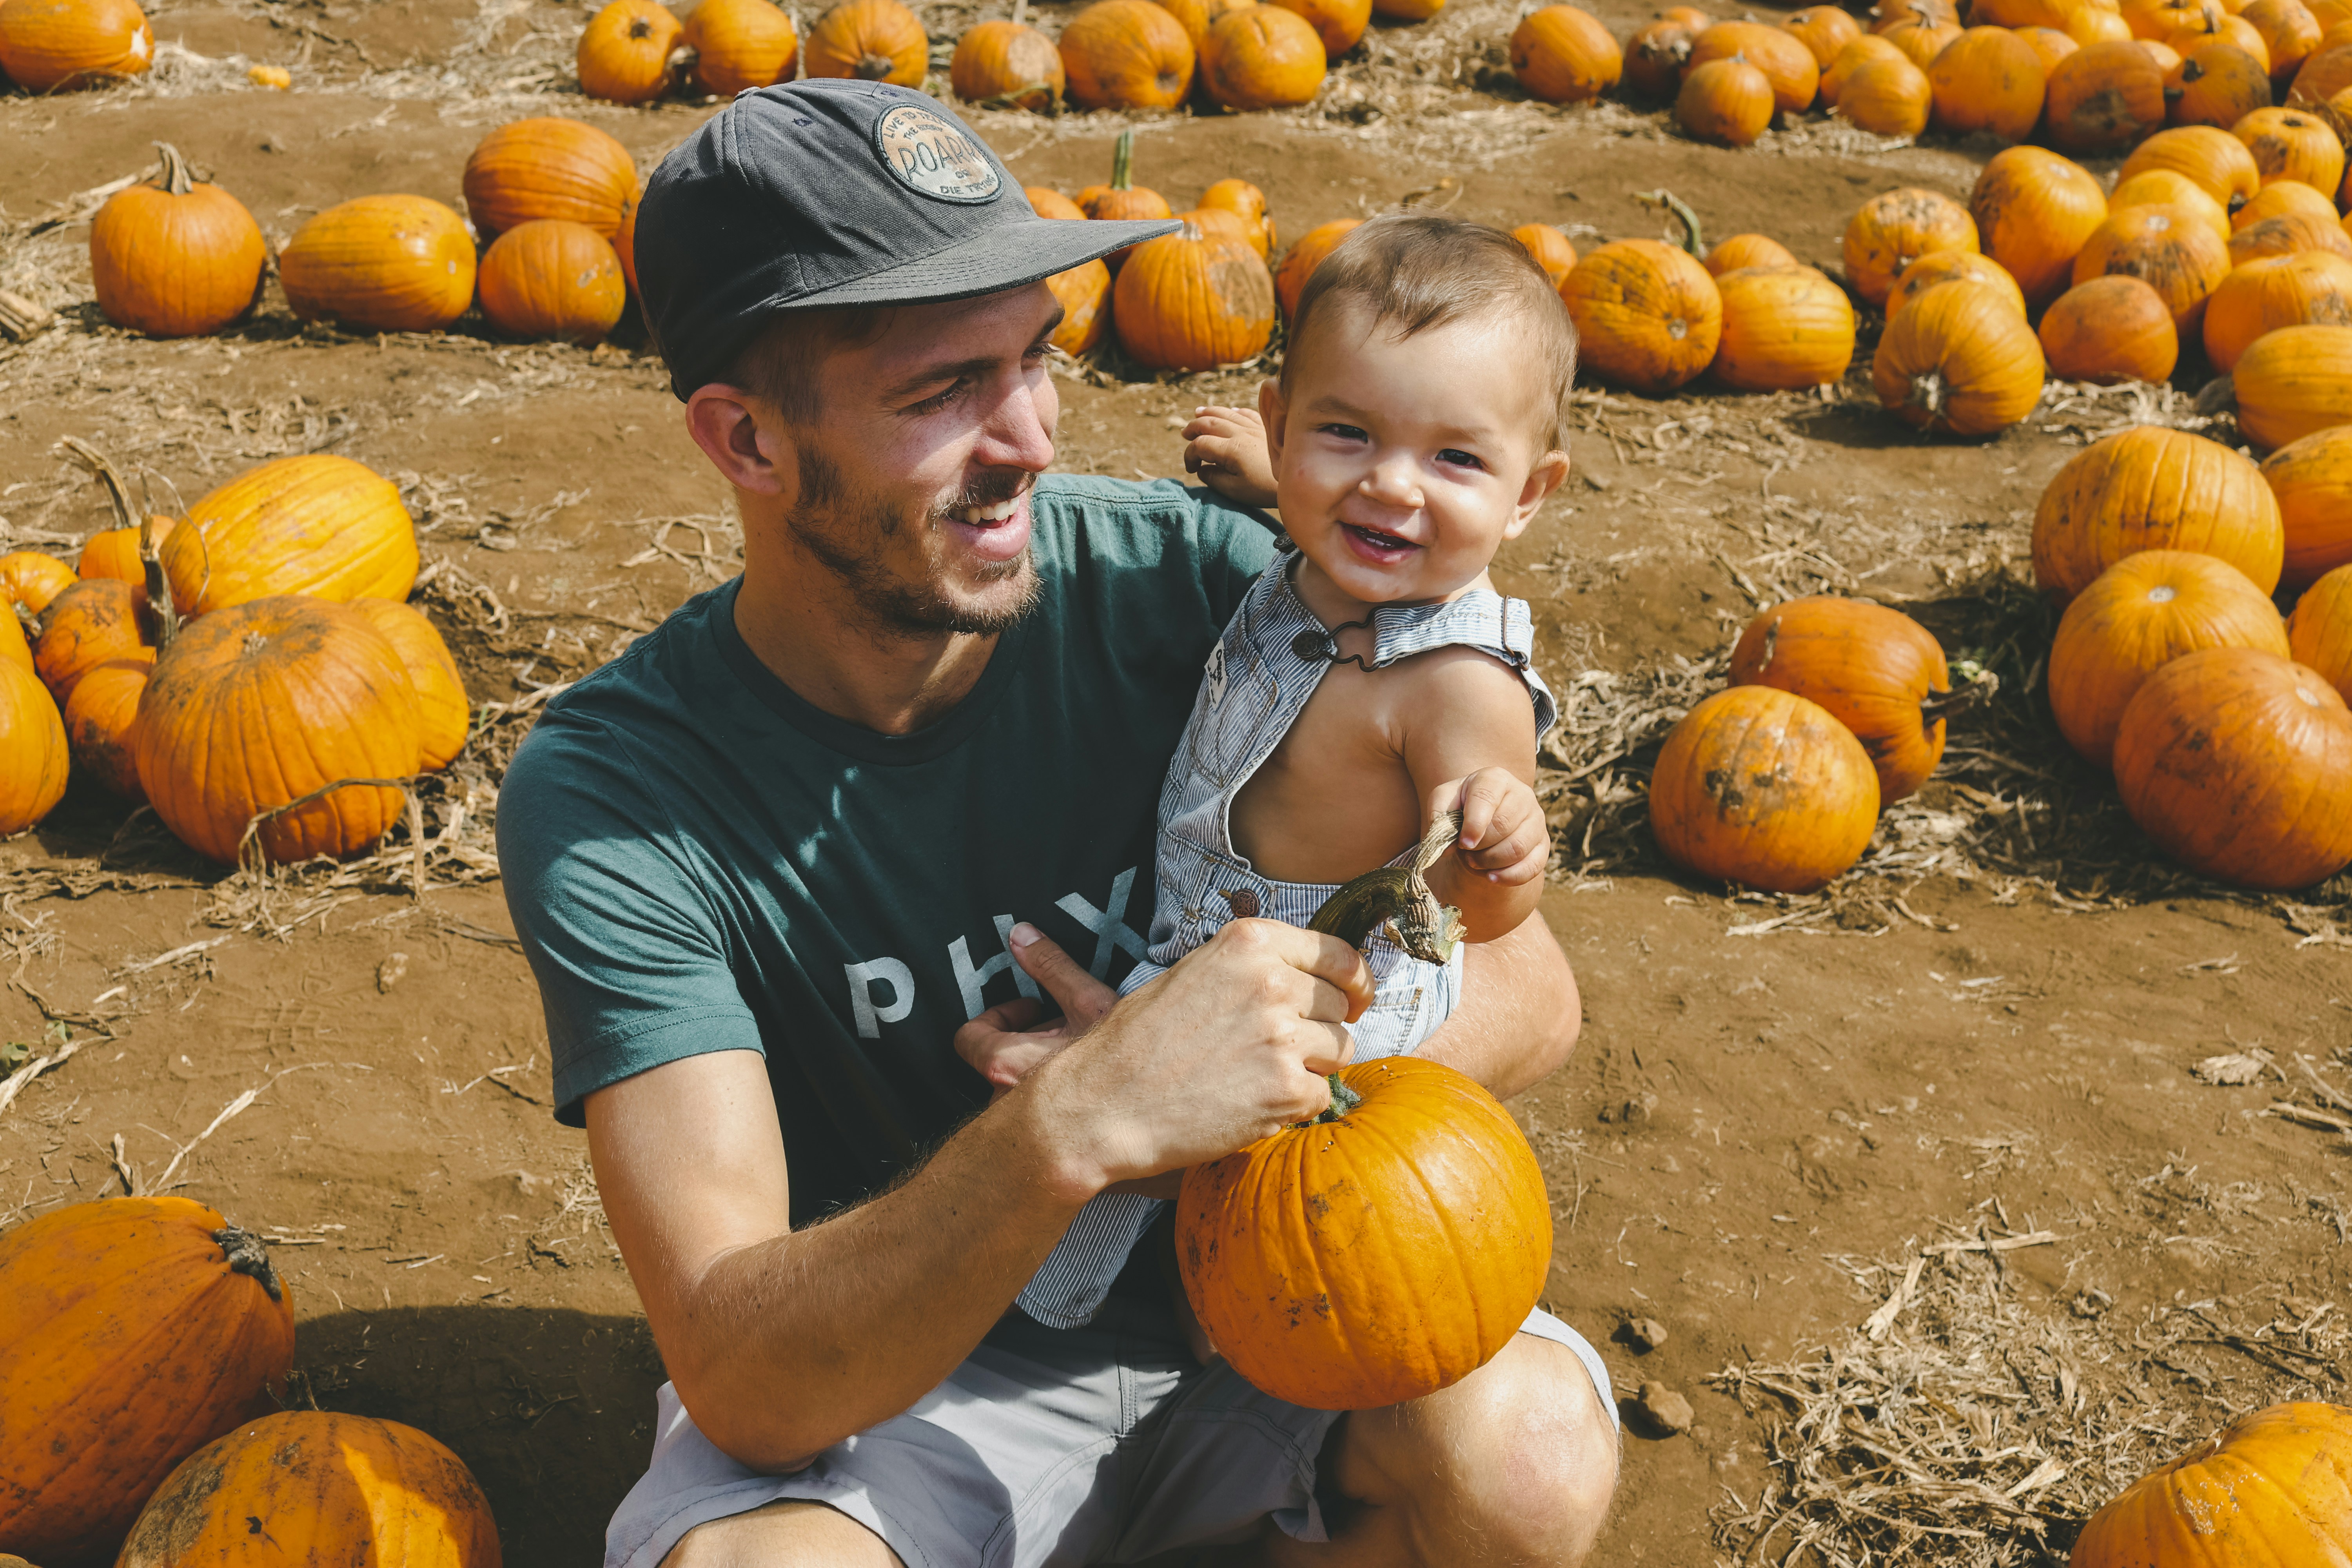 great photo recipe,how to photograph falling all over the pumpkins; smiling man carrying toddler boy while holding pumpkins